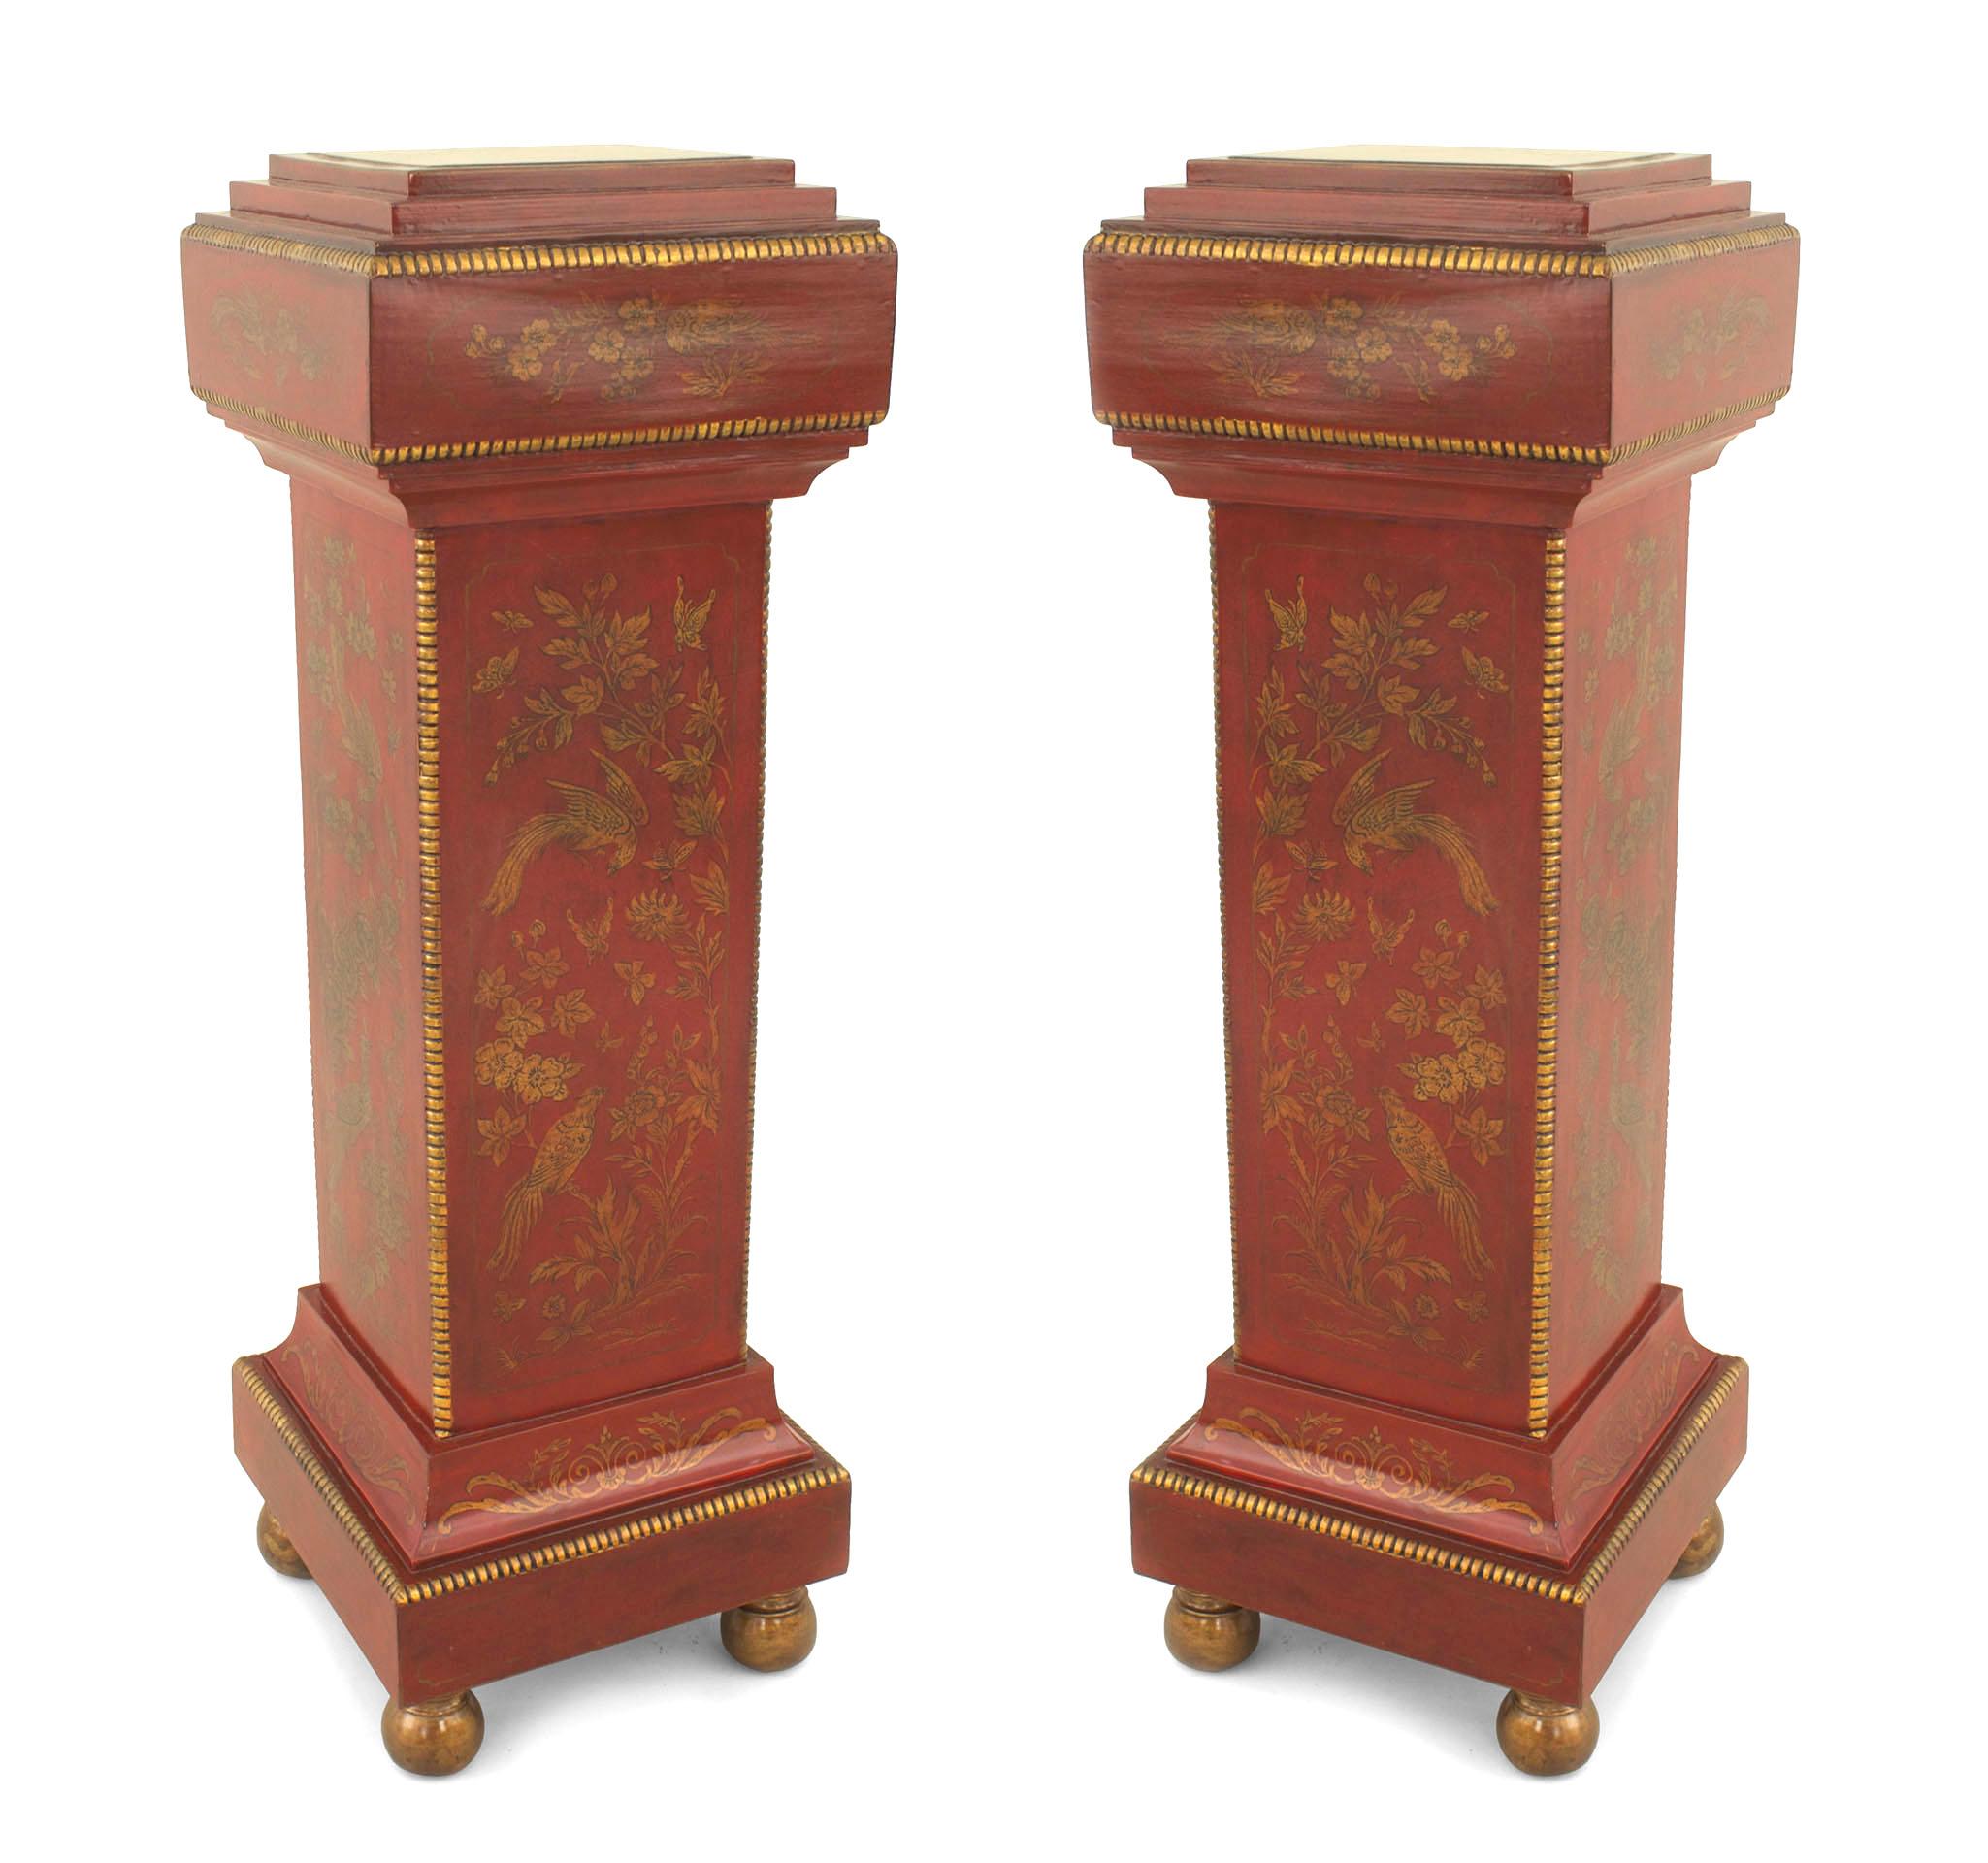 Pair of English Regency style (20th Cent) red lacquered pedestals with floral and bird chinoiserie decoration.
